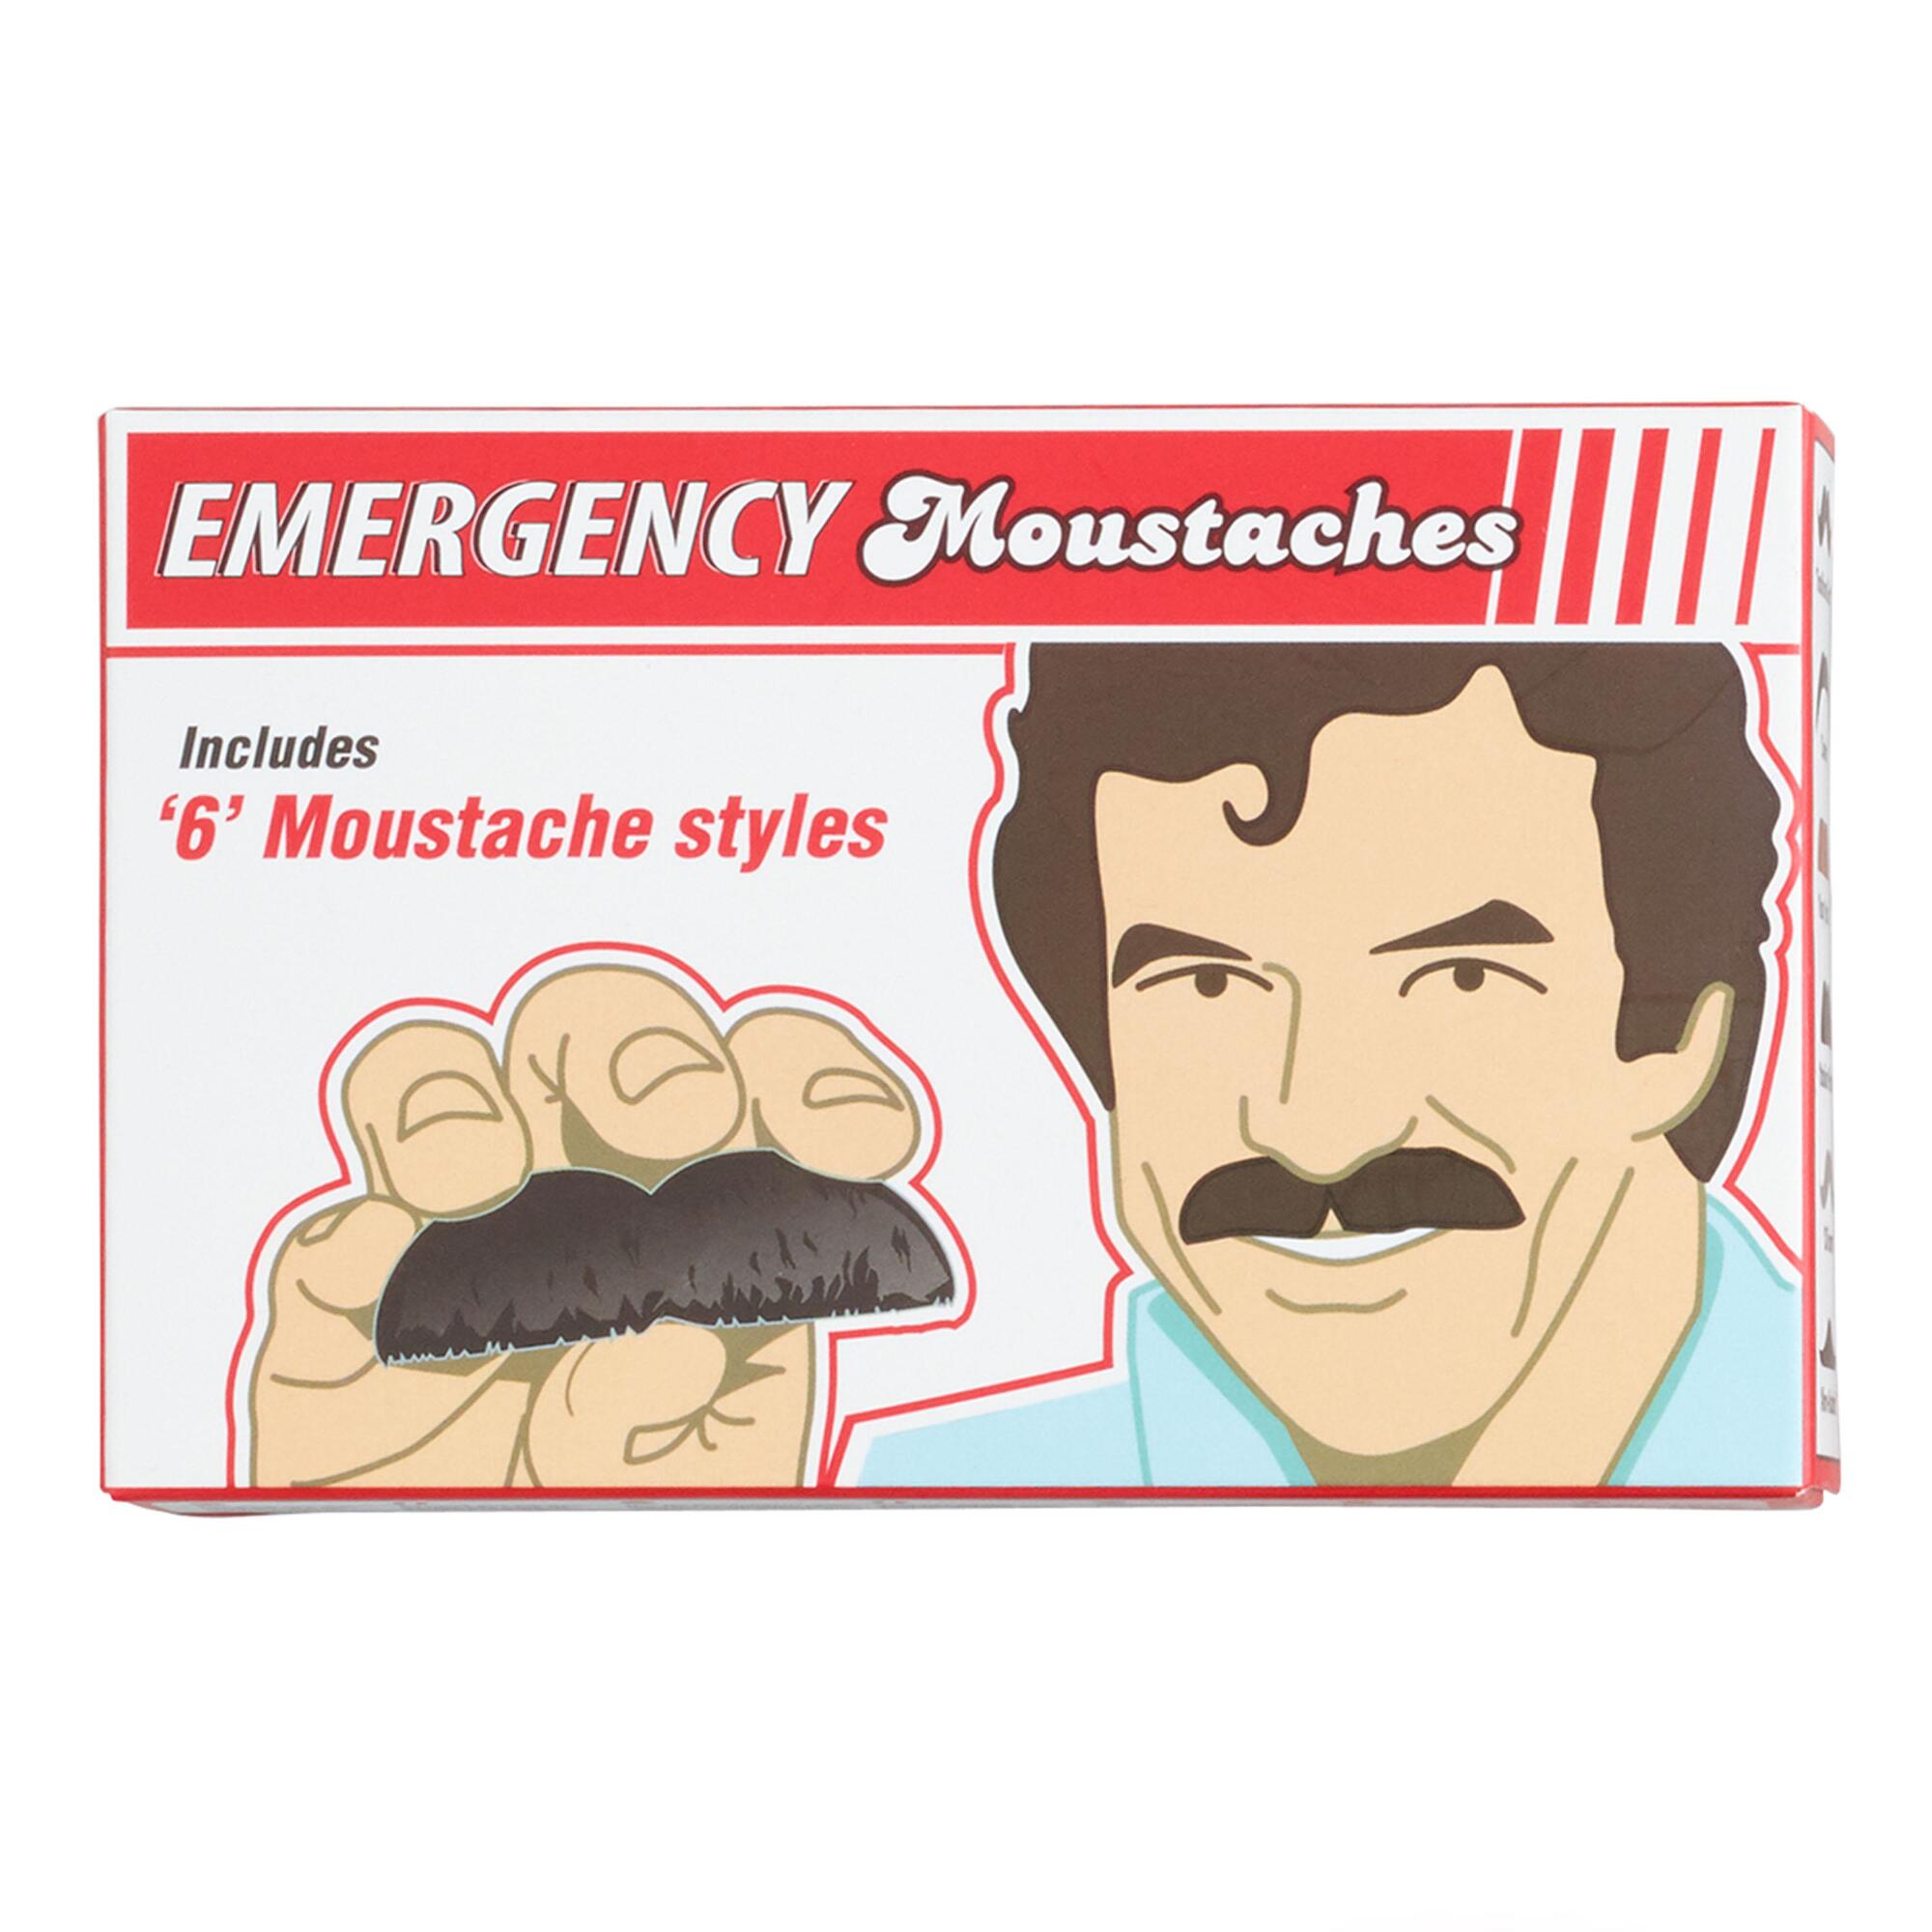 Emergency Moustaches by World Market